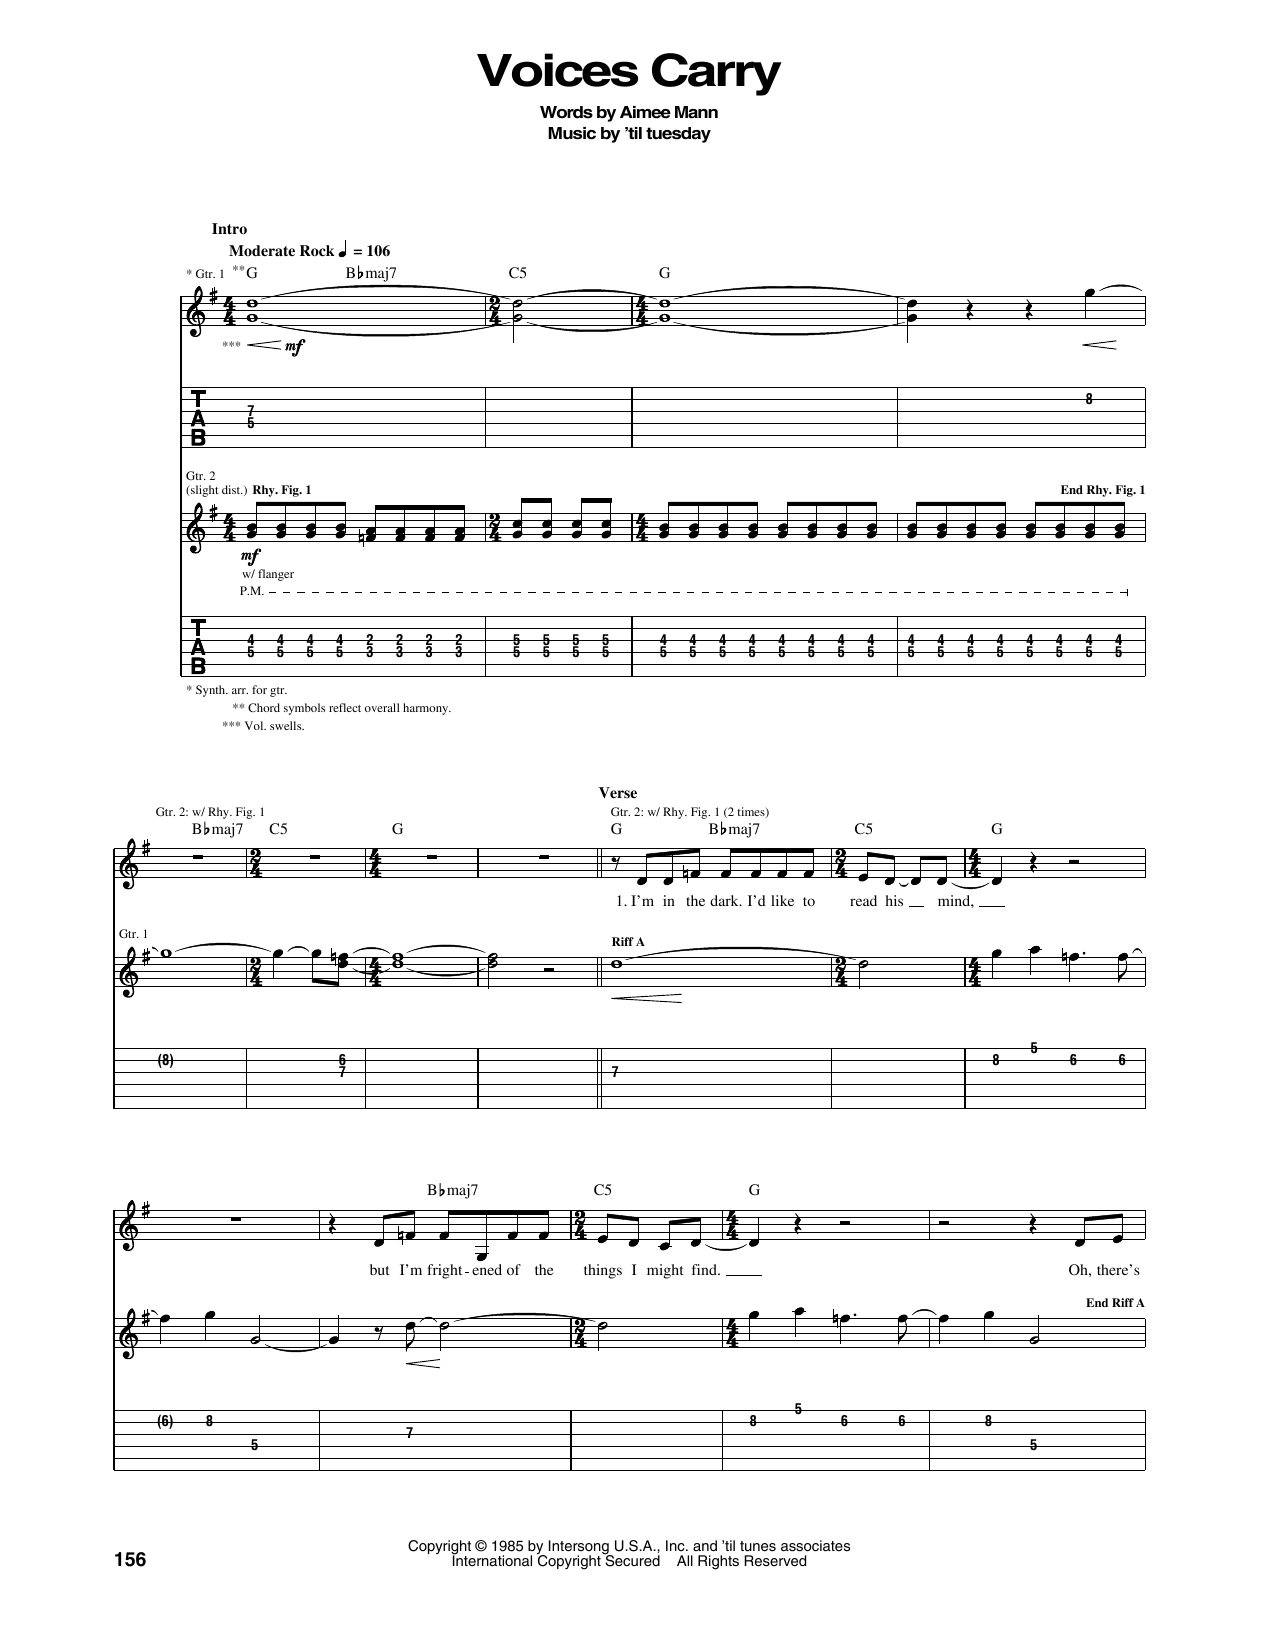 'til tuesday Voices Carry sheet music notes and chords. Download Printable PDF.